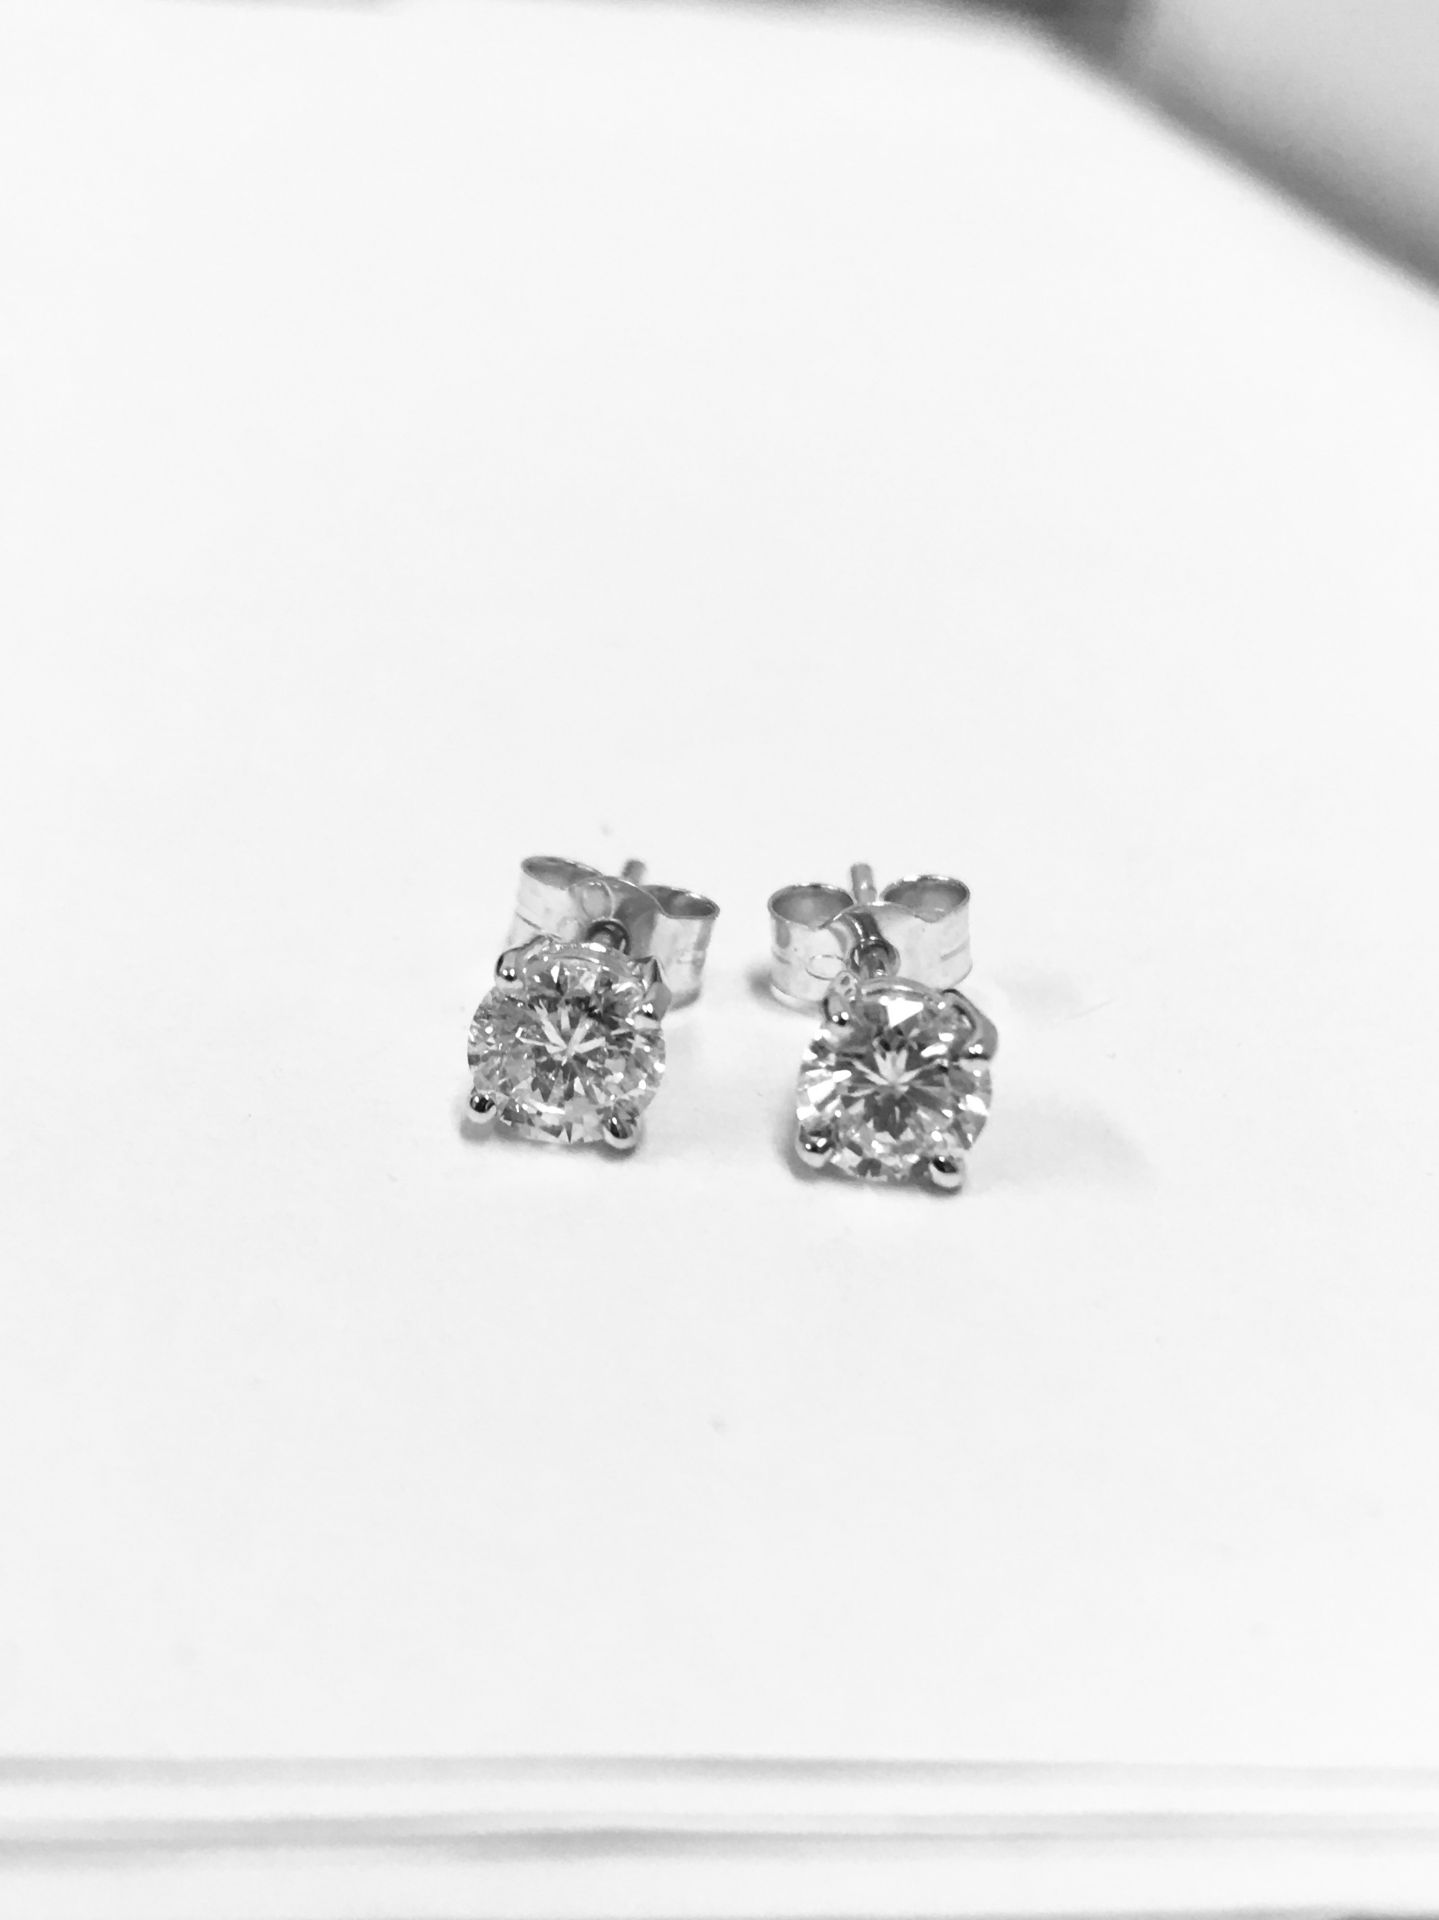 1.50Ct Diamond Solitaire Earrings Set In 18Ct White Gold.